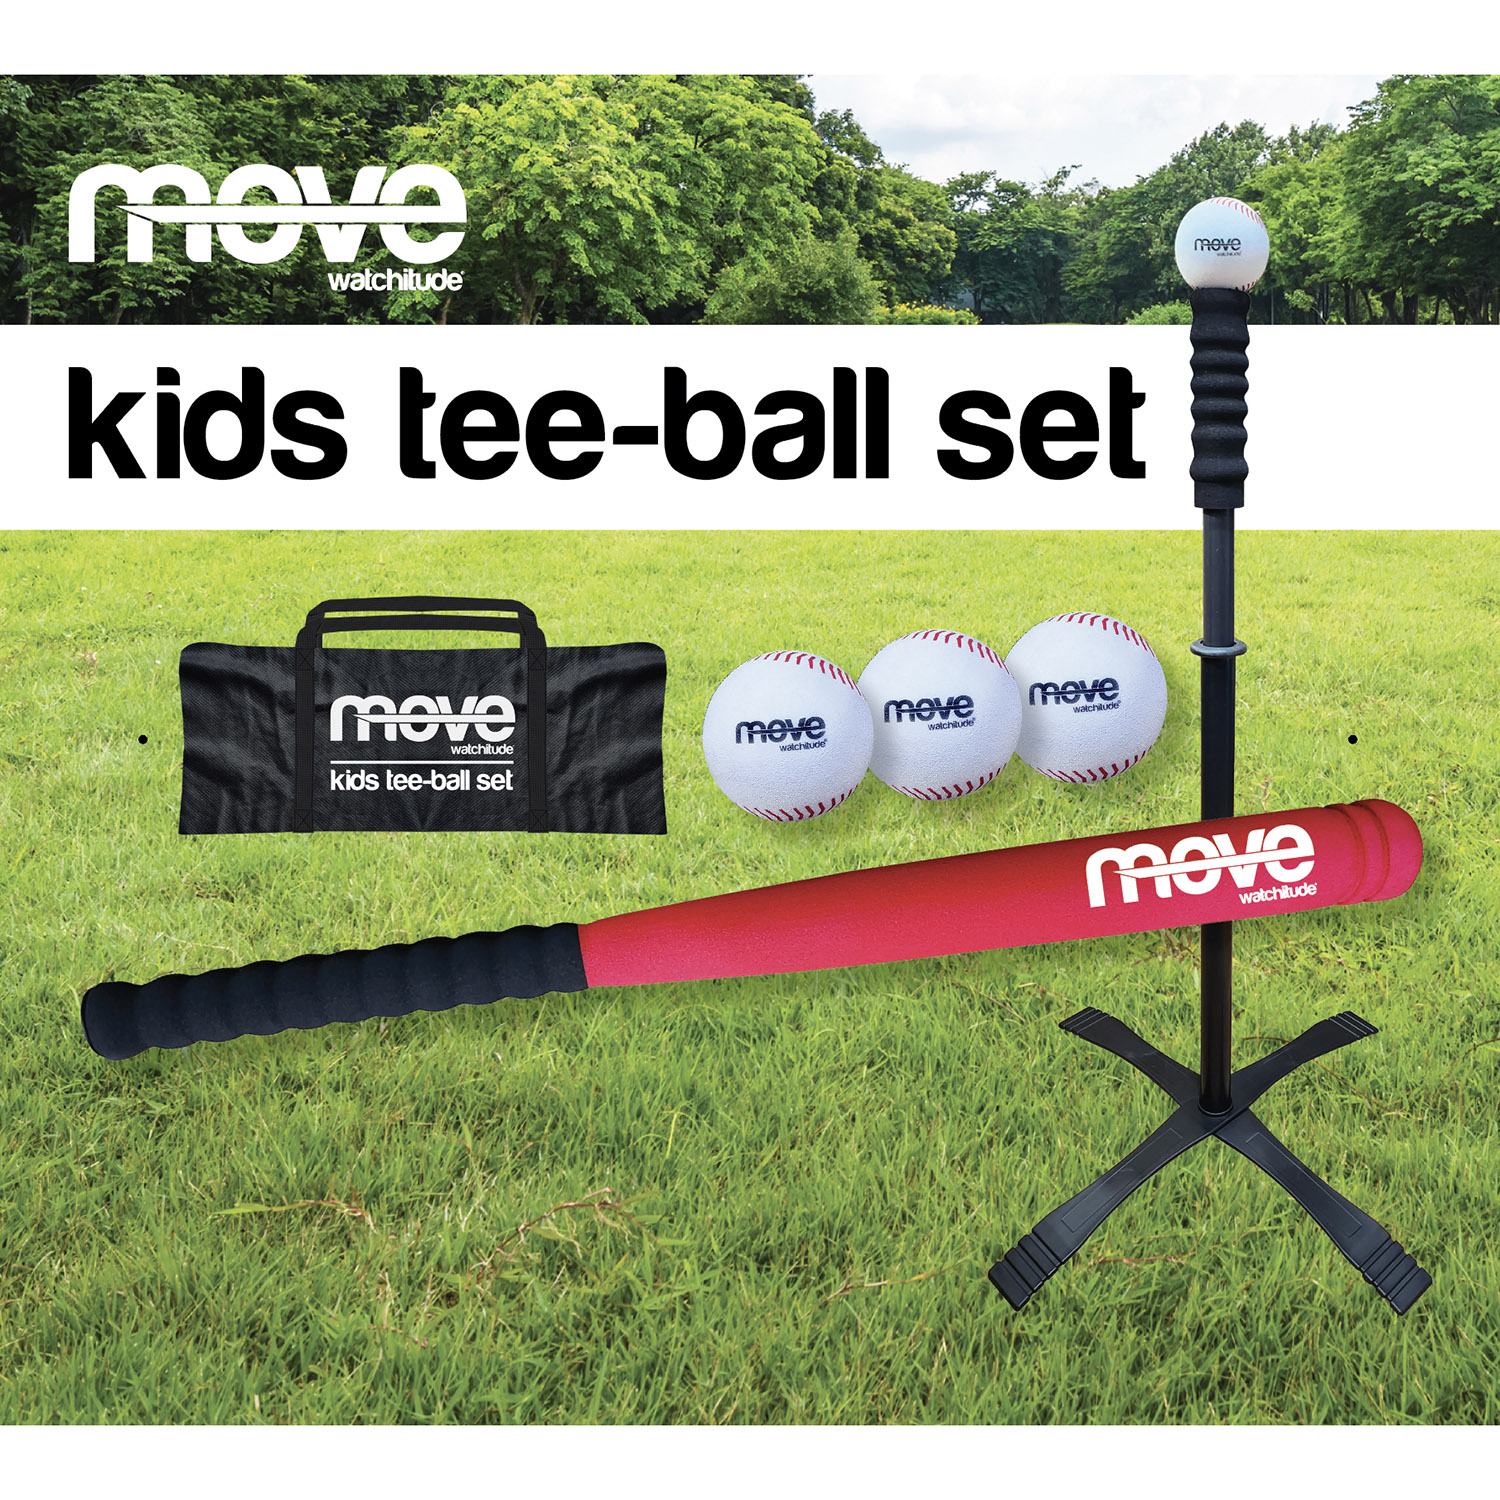 Kids T-Ball Set - Toy Baseball Tee-Ball for kids aged 3-10. Three Soft Balls Included.